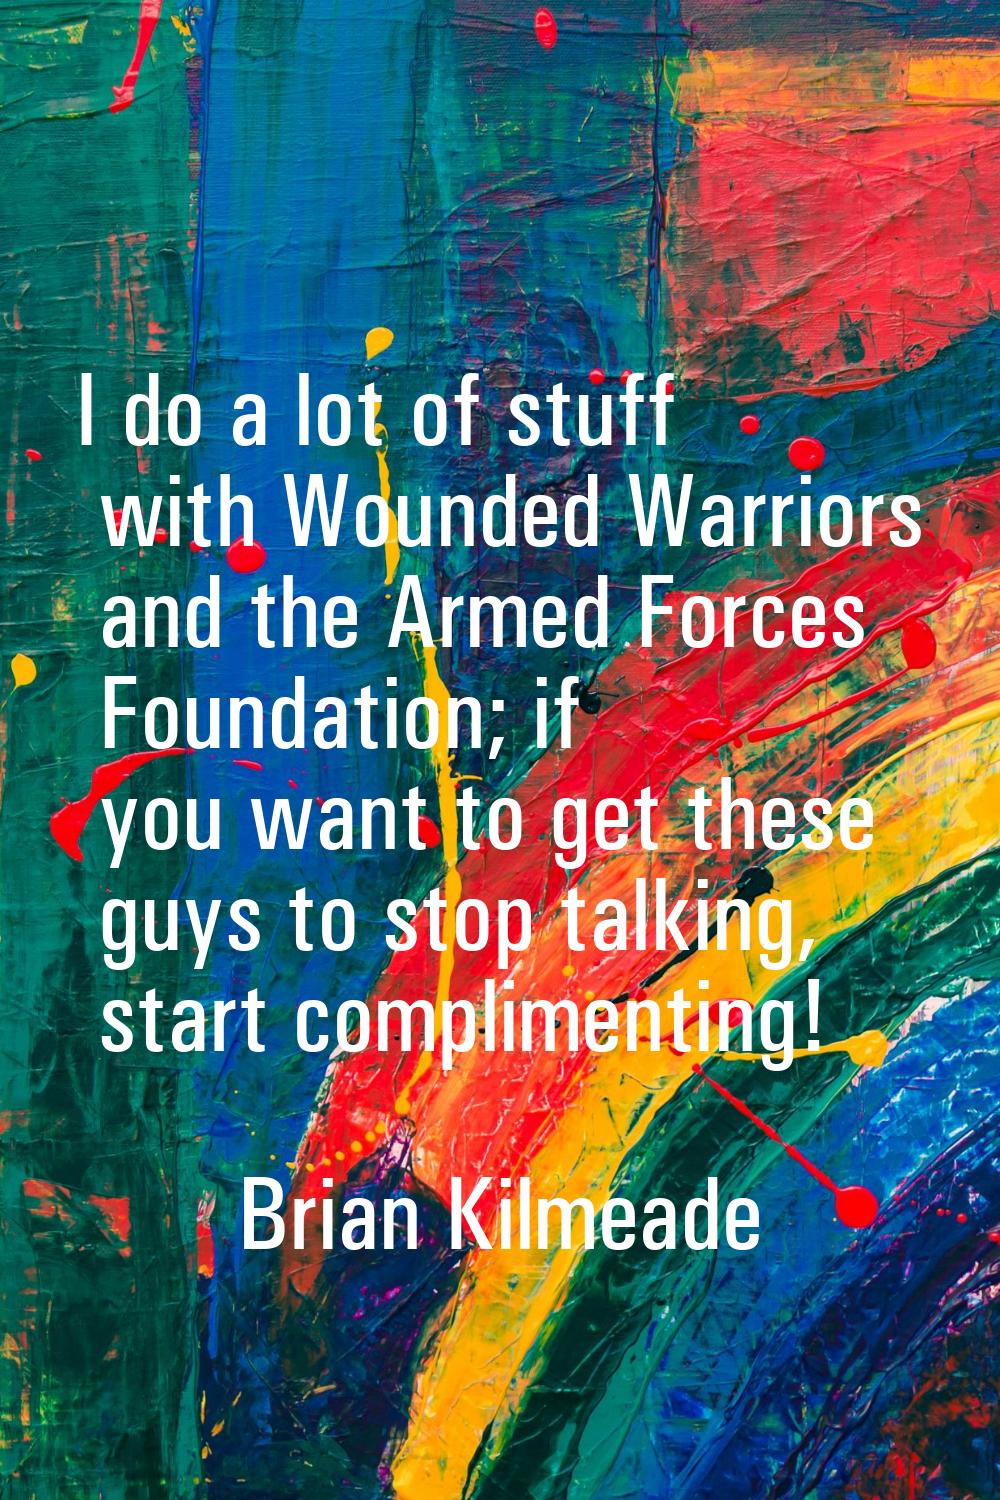 I do a lot of stuff with Wounded Warriors and the Armed Forces Foundation; if you want to get these